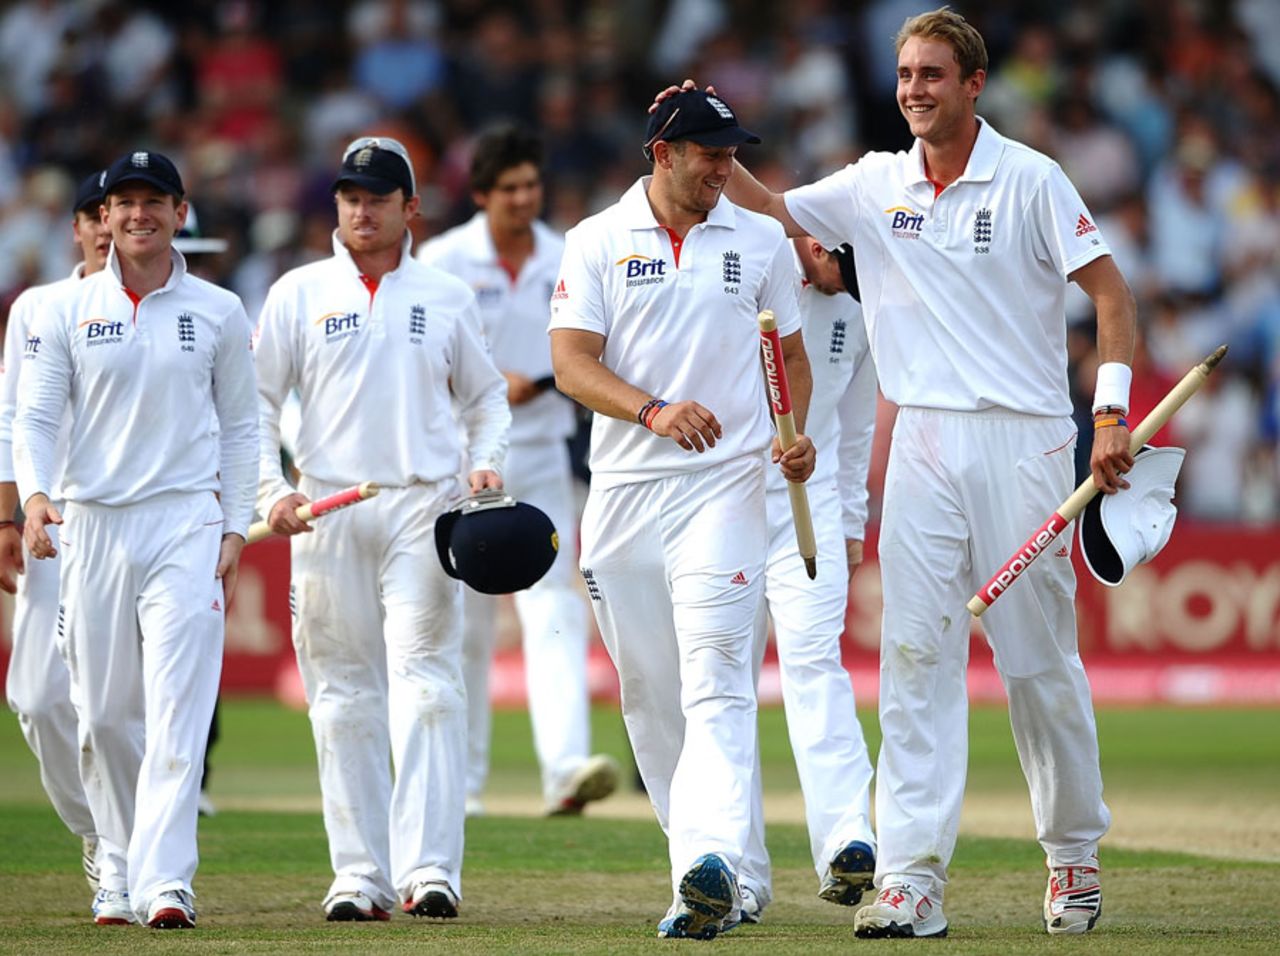 Stuart Broad and Tim Bresnan lead the victorious England side off the field, England v India, 2nd Test, Trent Bridge, 4th day, August 1, 2011